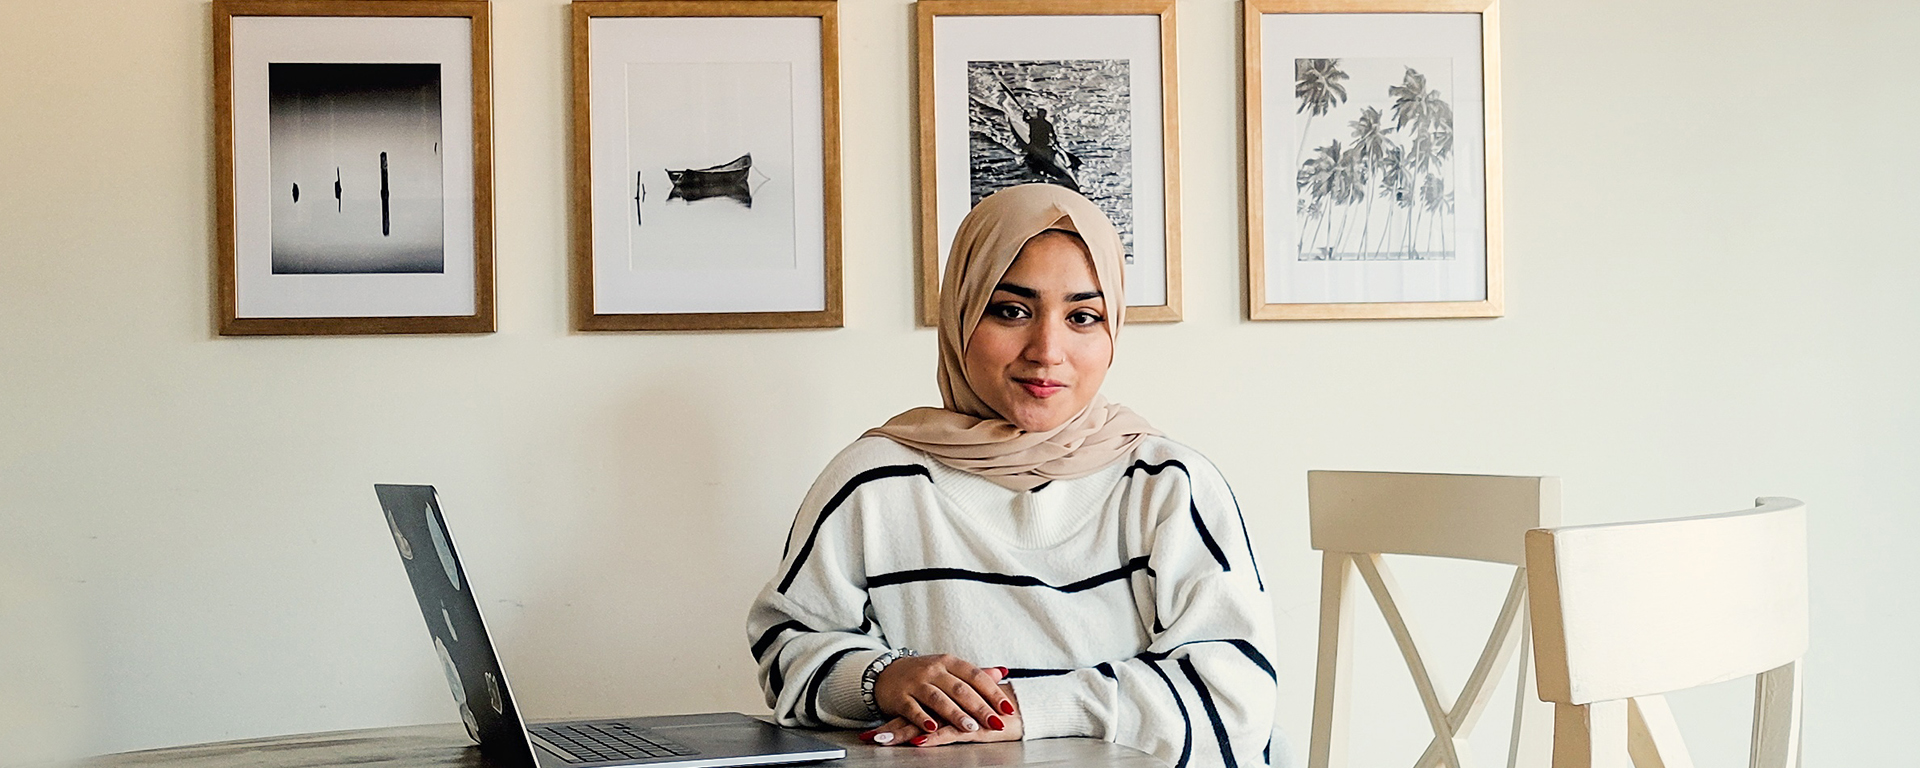 Capital One Cyber Security intern Khadija sits at her table with her laptop working from home behind a wall of picture frames